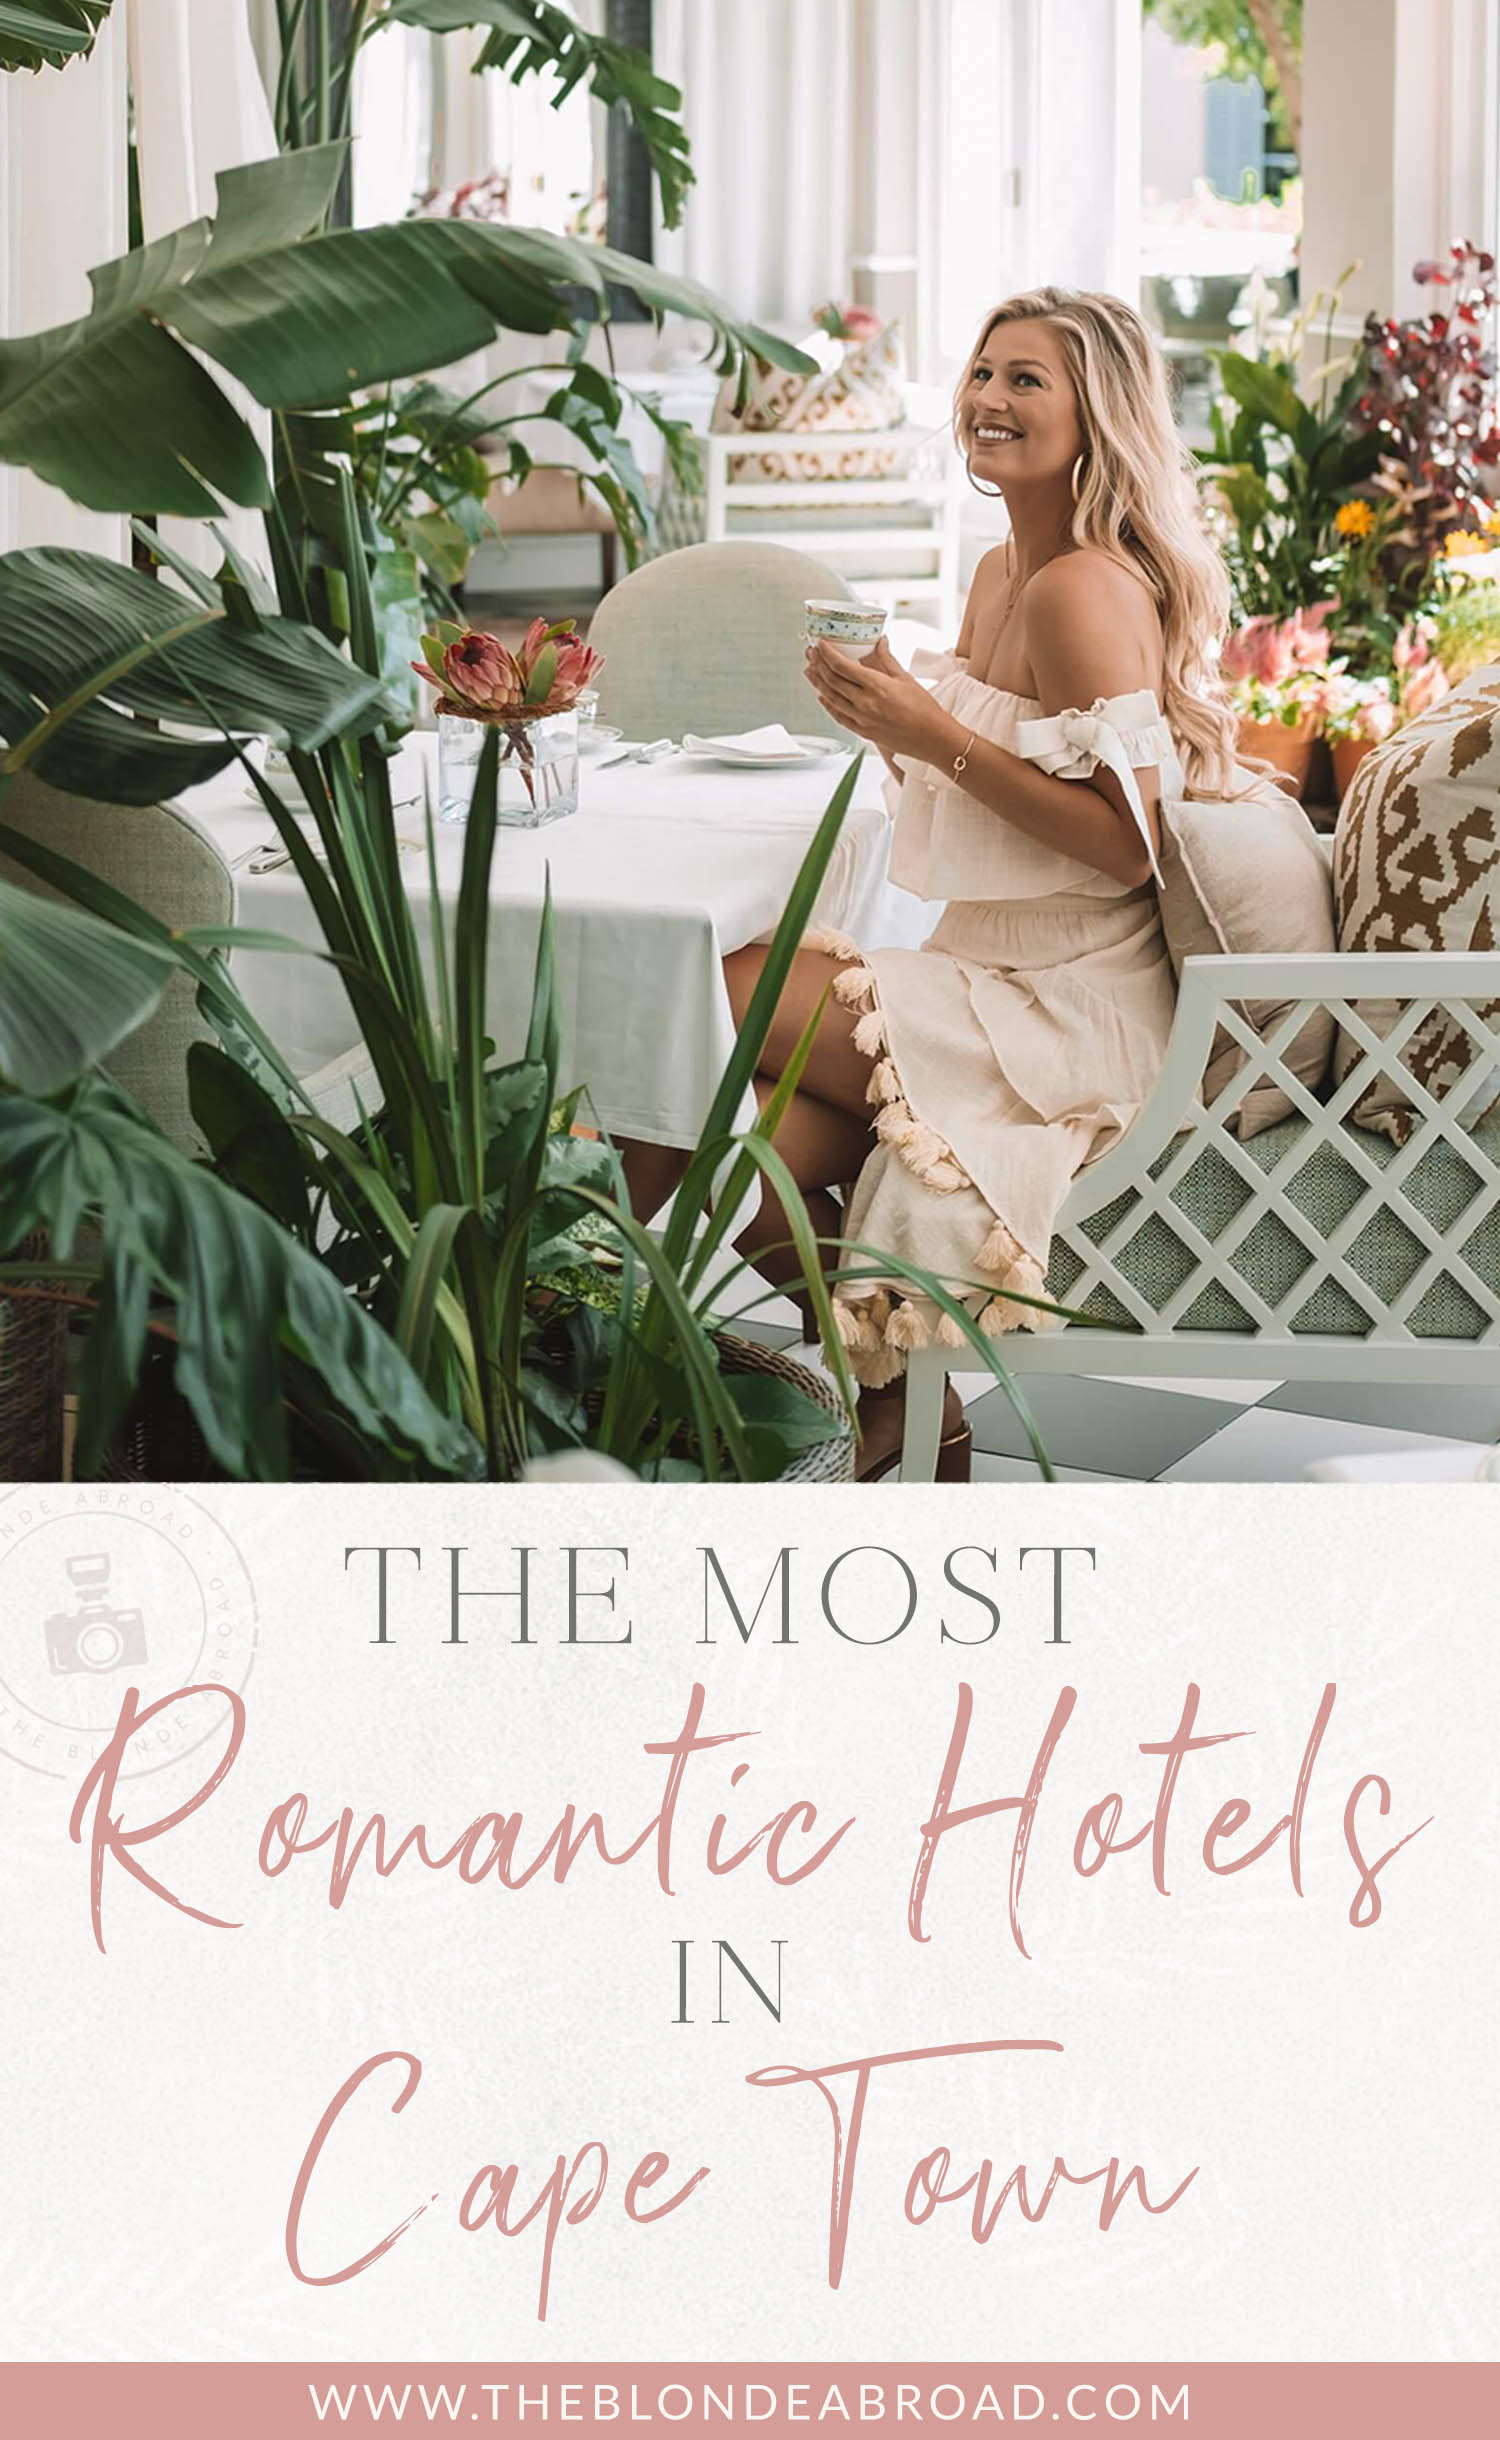 Romantic Hotels in Cape Town